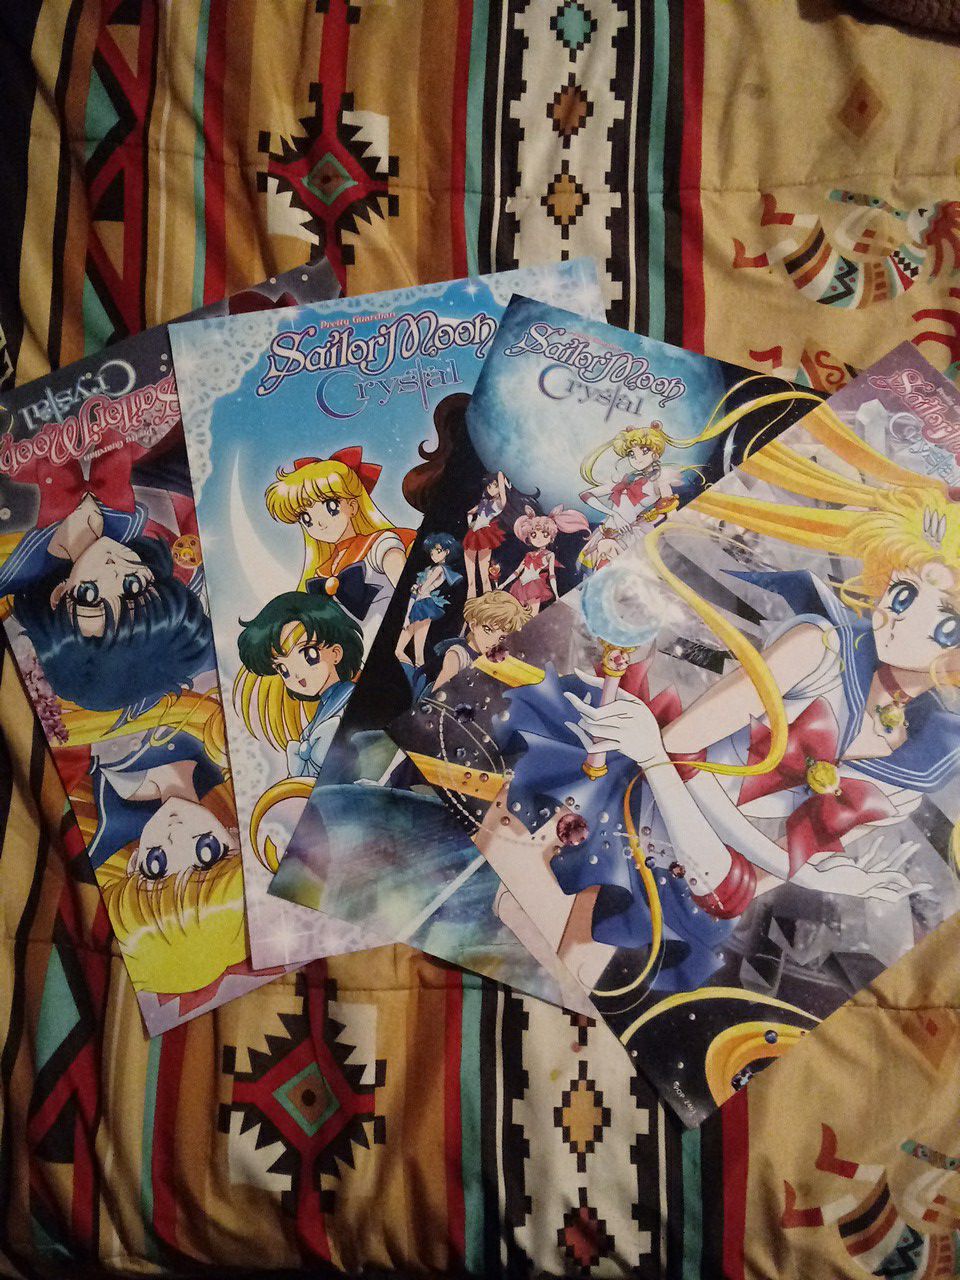 ALL THE SAILOR MOON POSTER